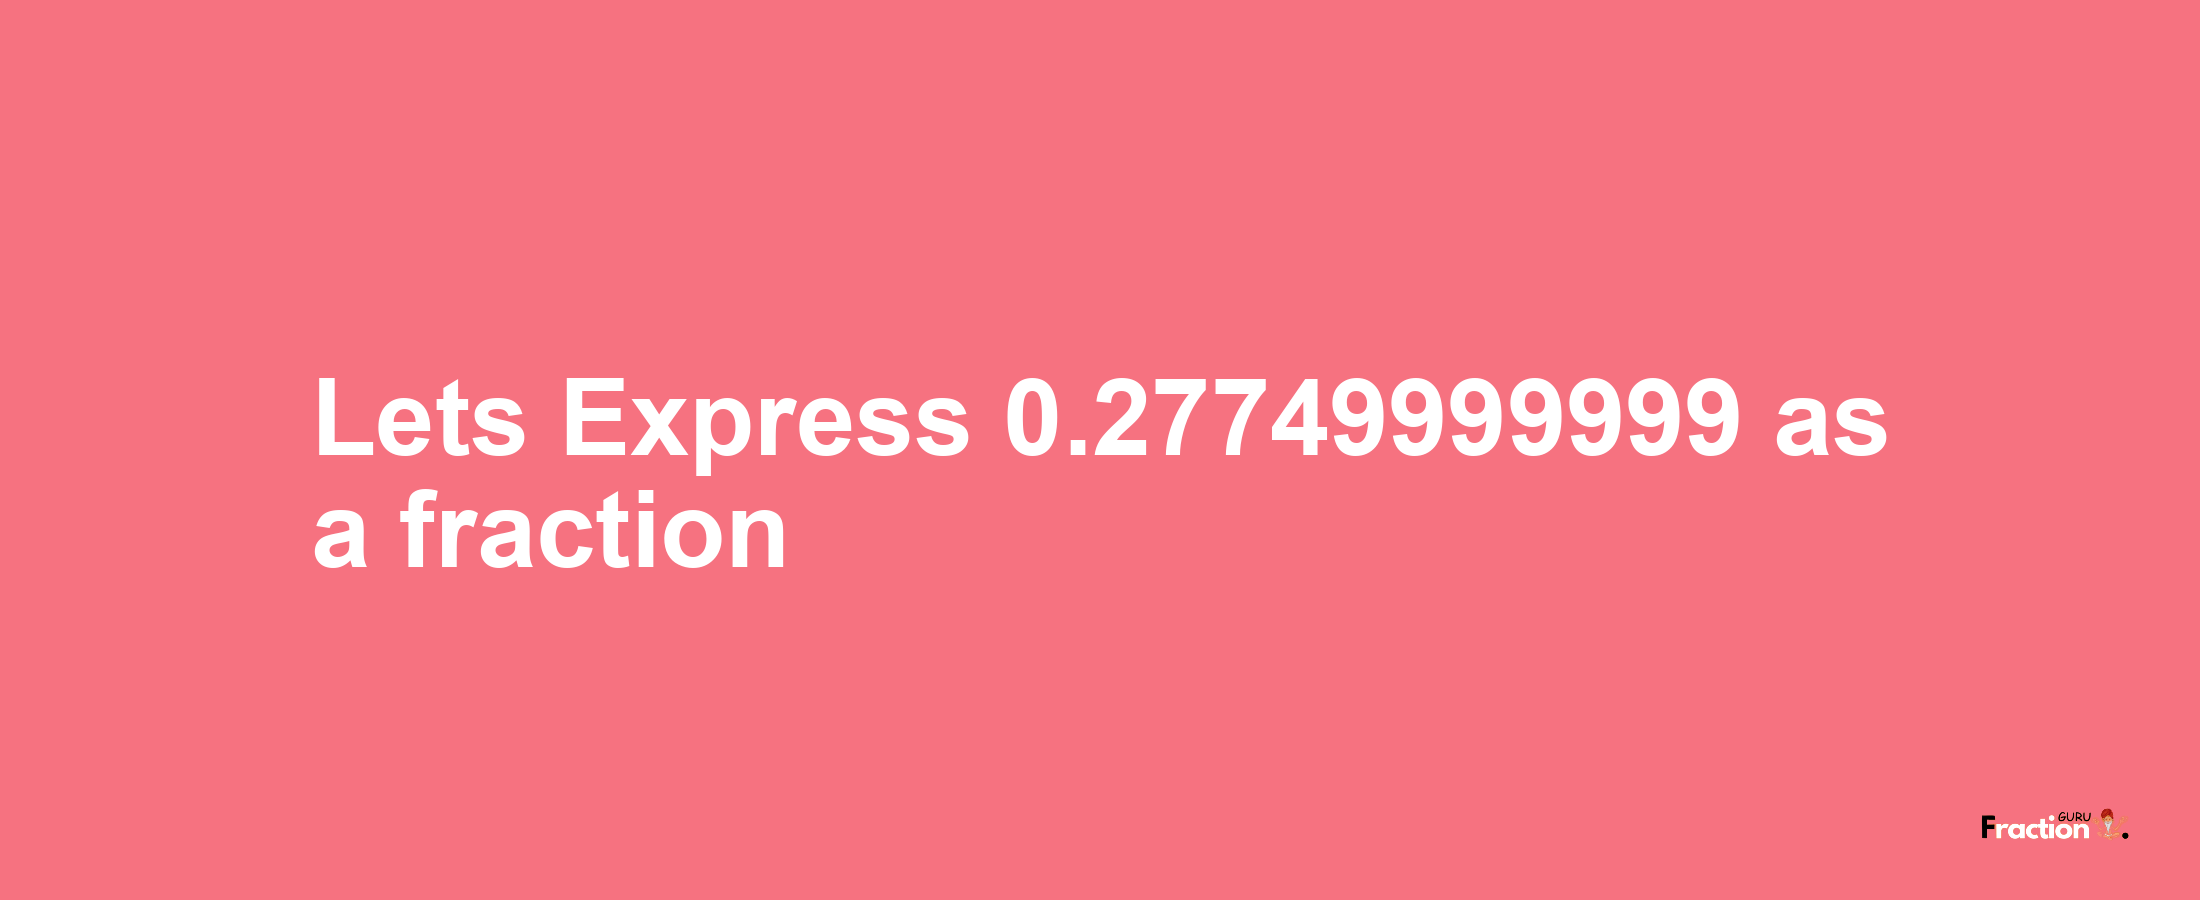 Lets Express 0.27749999999 as afraction